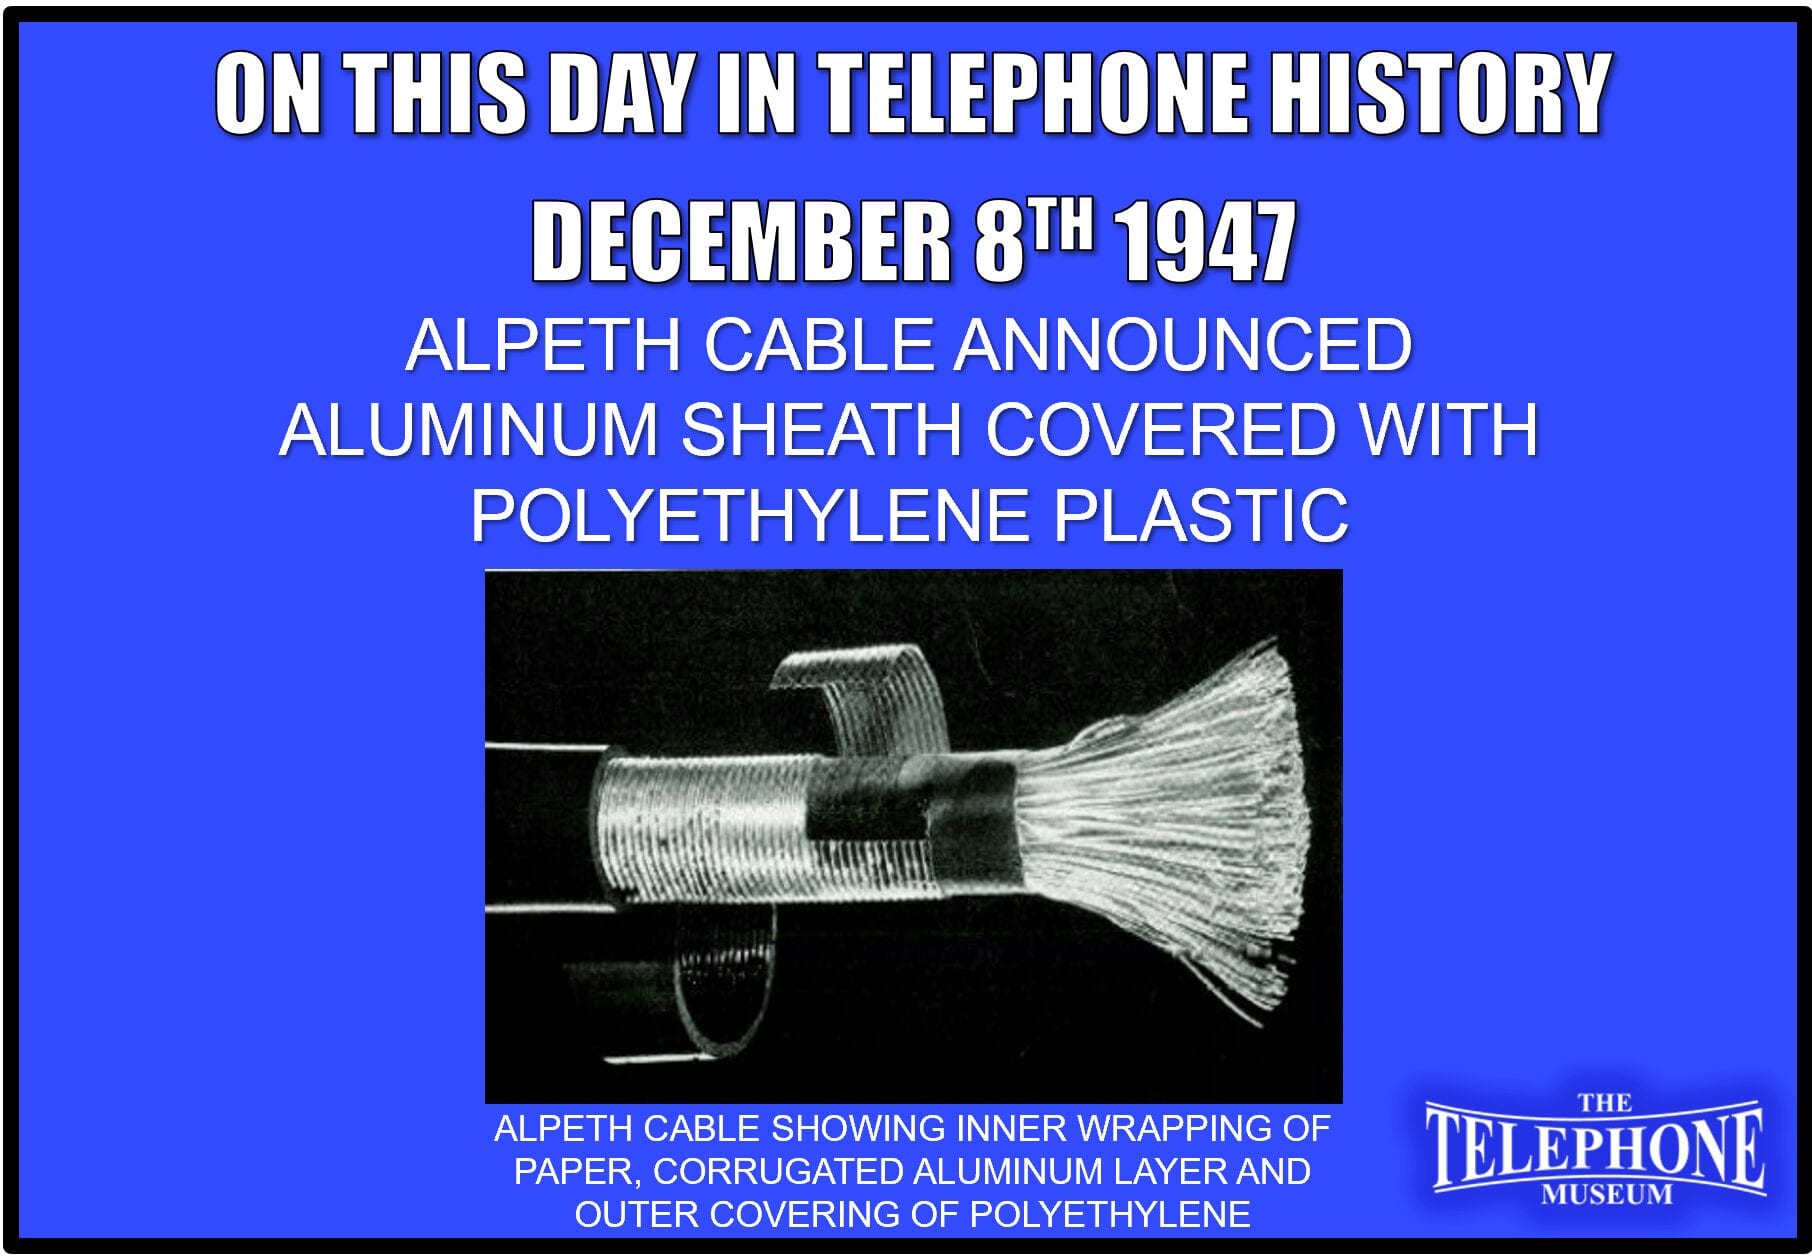 On This Day in Telephone History December 8TH 1947 - Development of Alpeth cable with aluminum sheath covered with polyethylene plastic announced. Since lead-sheathed cable was at peak production, and available lead was a postwar scarcity, Western Electric planned to use Alpeth cable in exchange areas. This enabled Western Electric cable plants to increase their output.